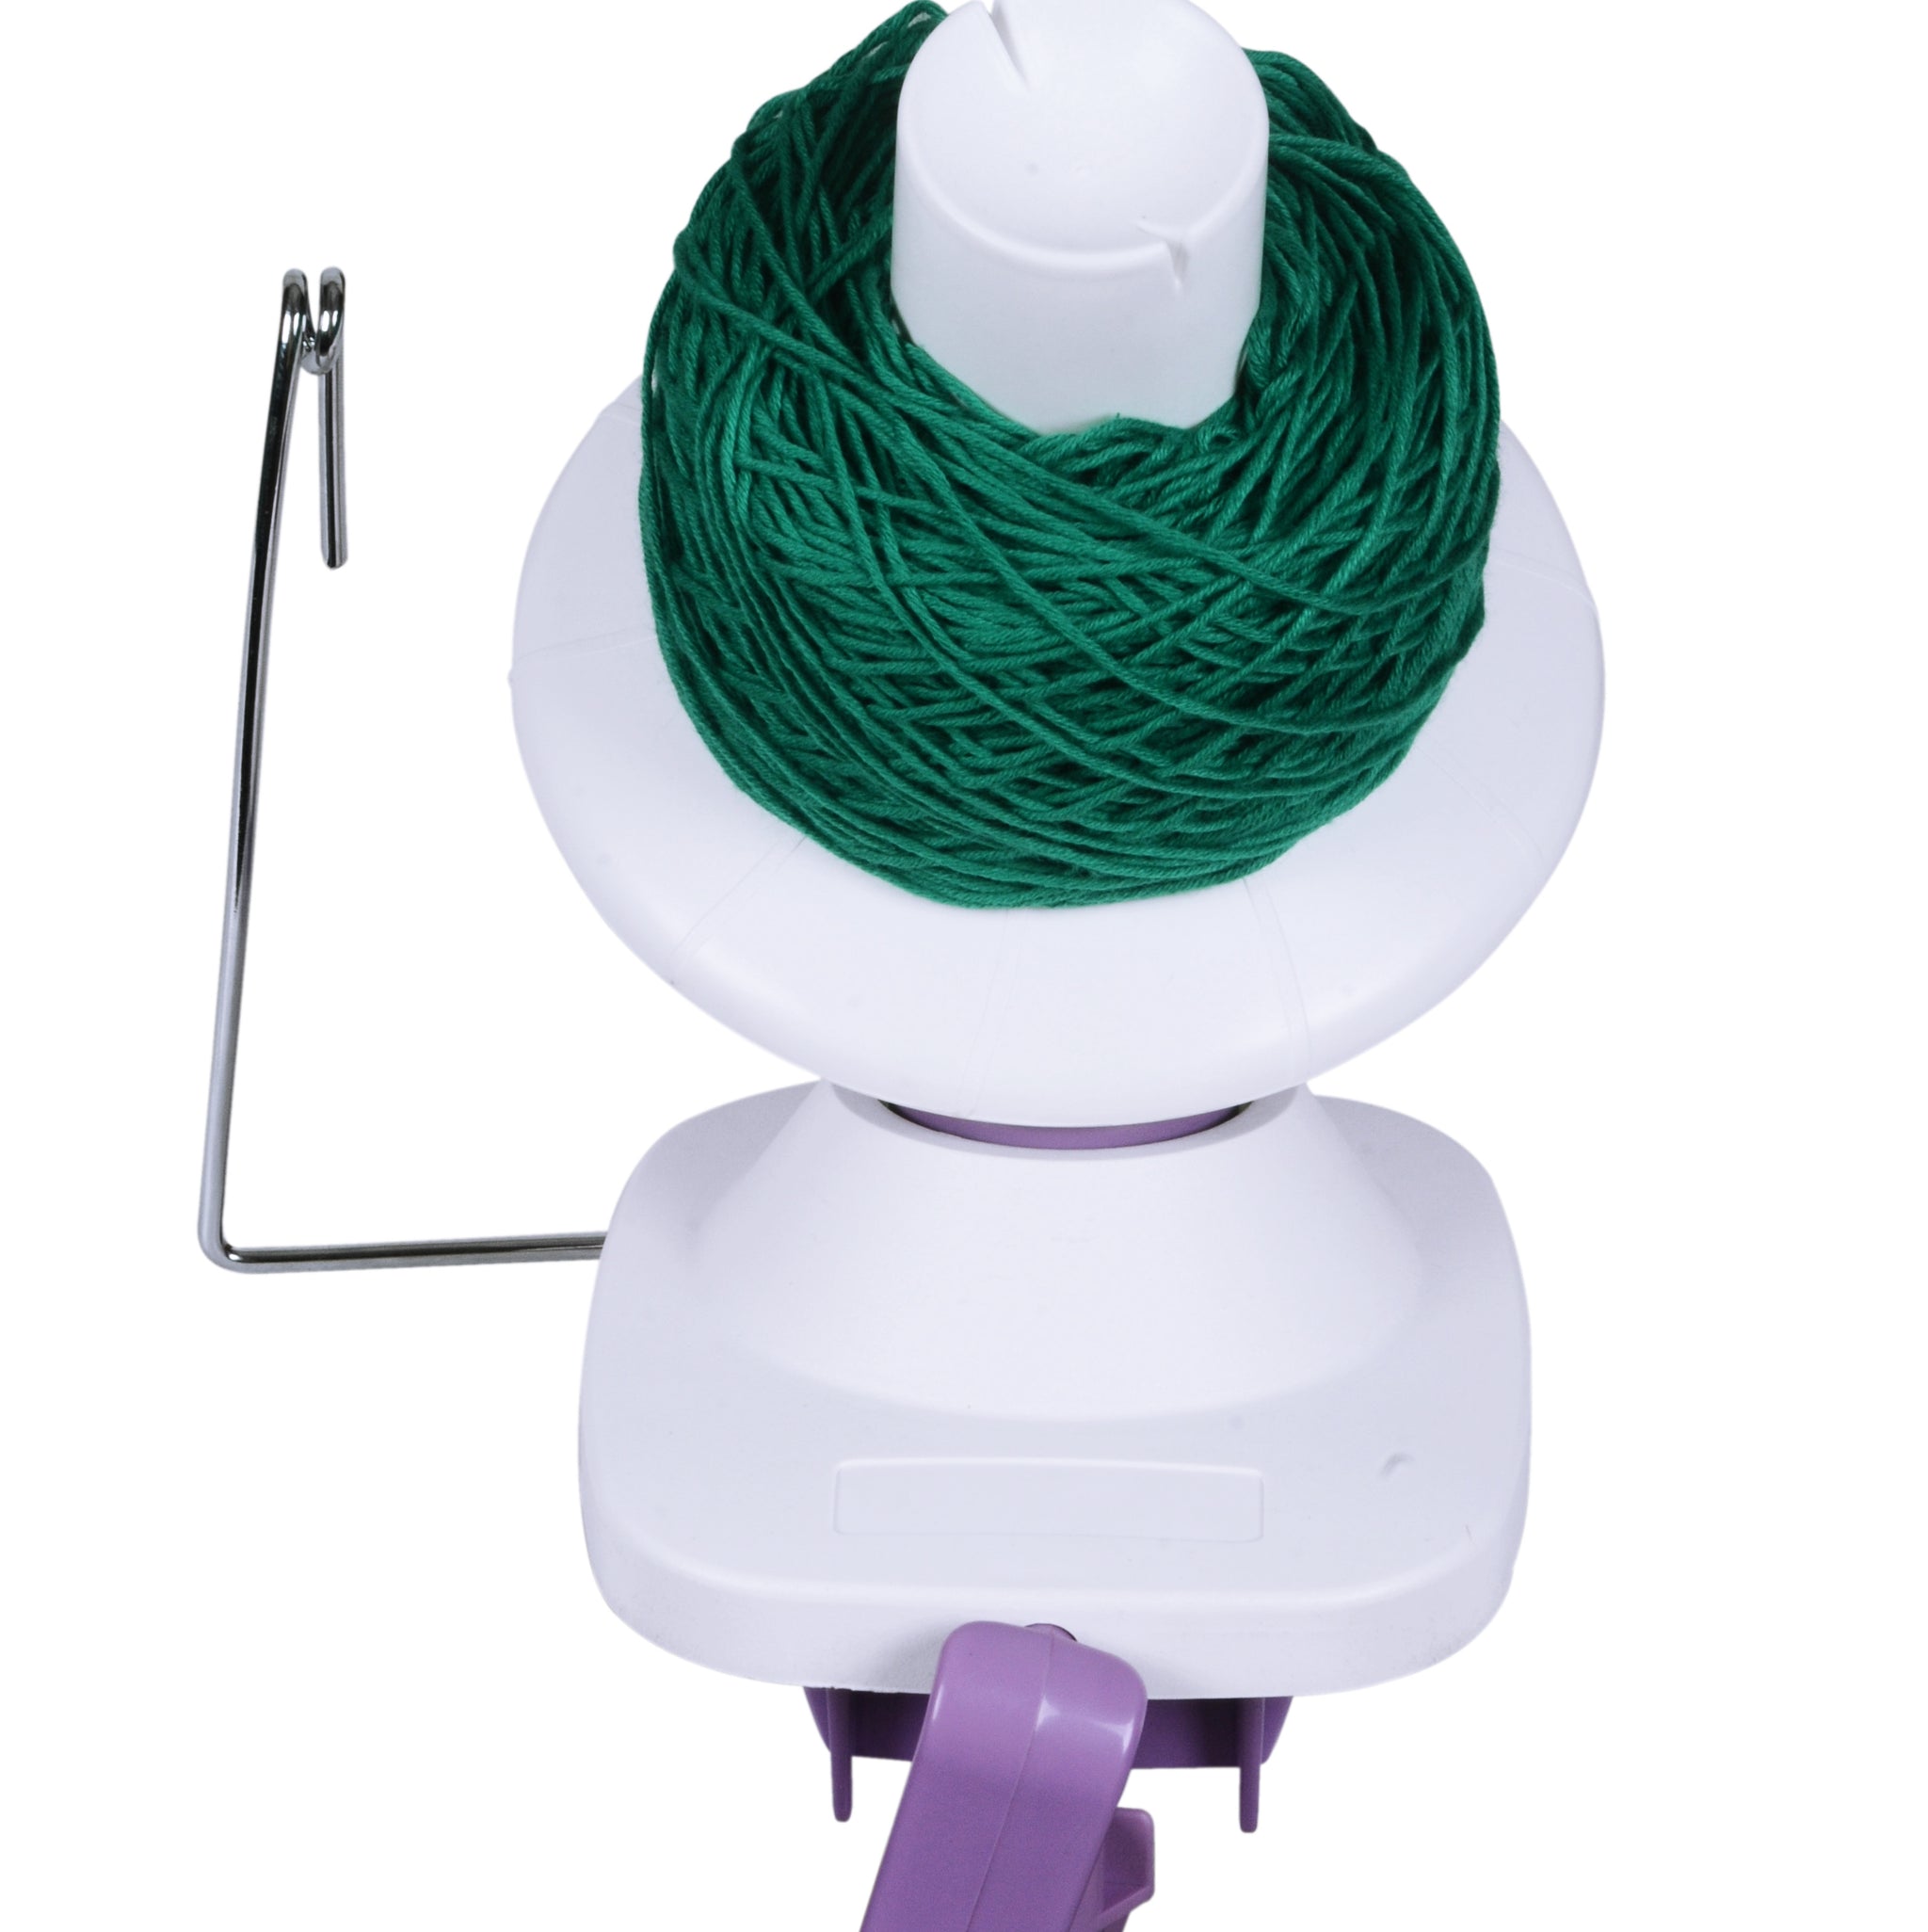 Ideal Delusions: What I Learned About Yarn Winders